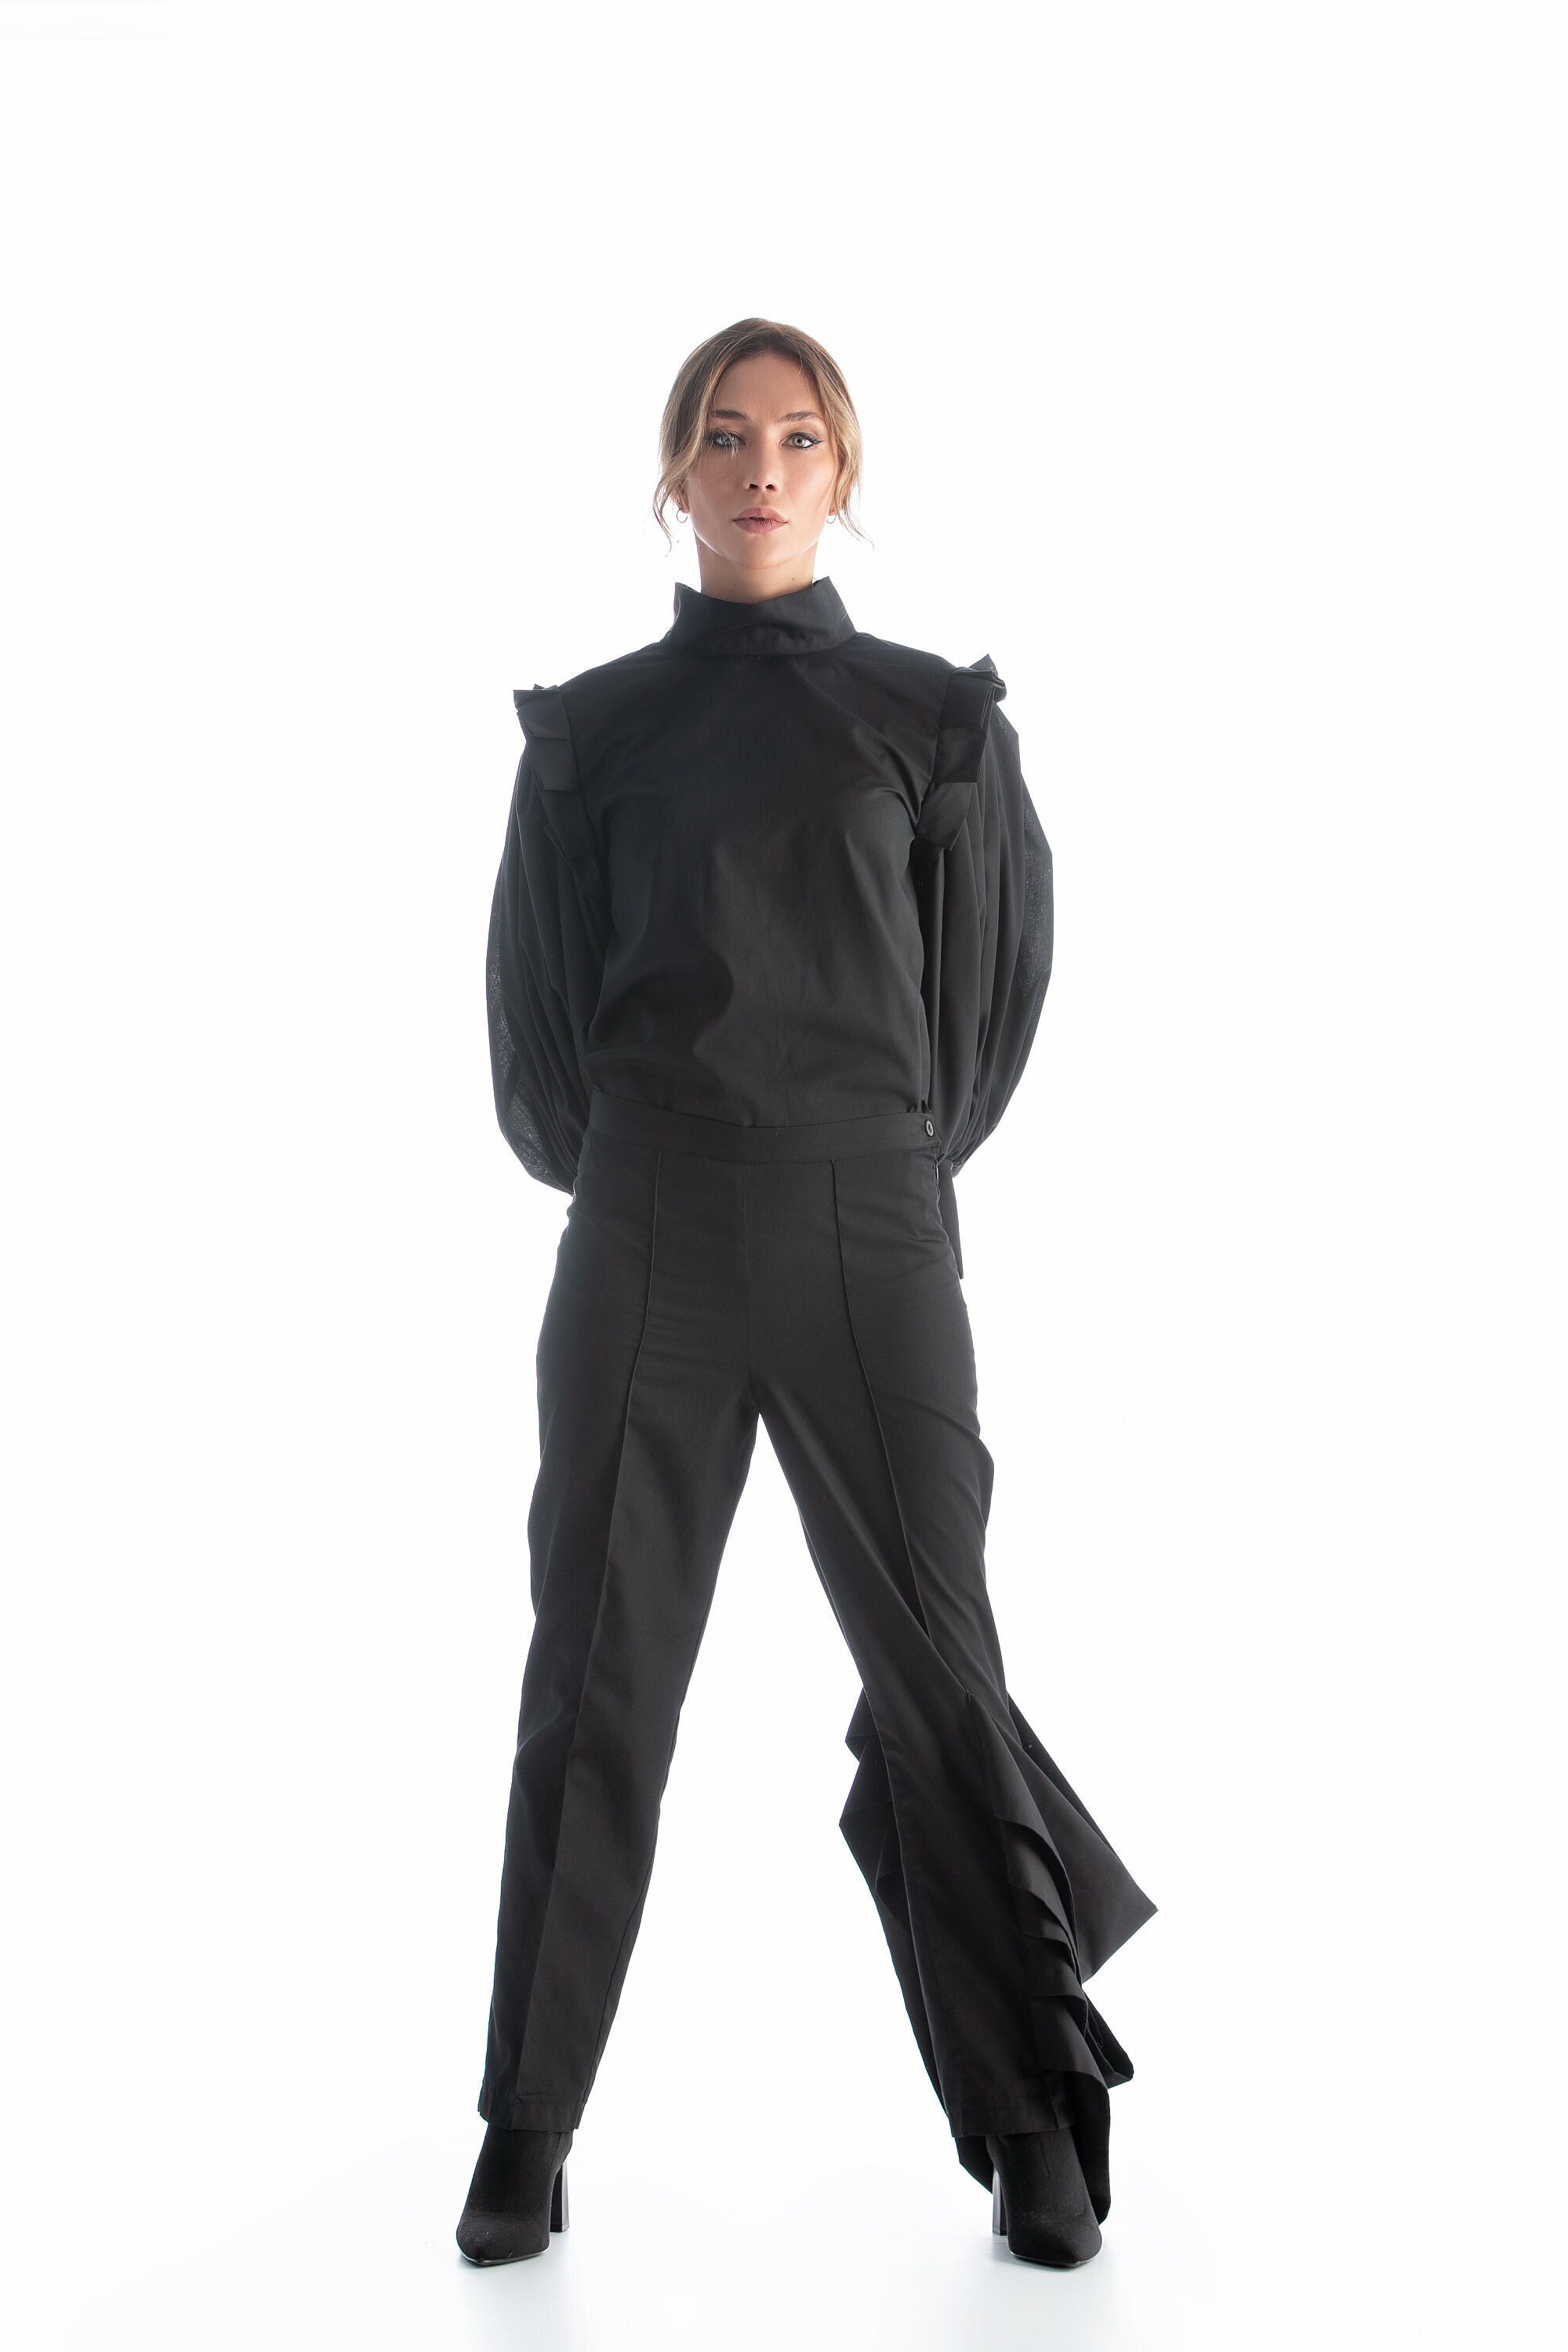 Formal Women's Set in Black, Cotton Set of Shirt and Pants, Asymmetric Black  Pants and Puff Sleeve Shirt, Avant Garde Clothing for Women -  Canada